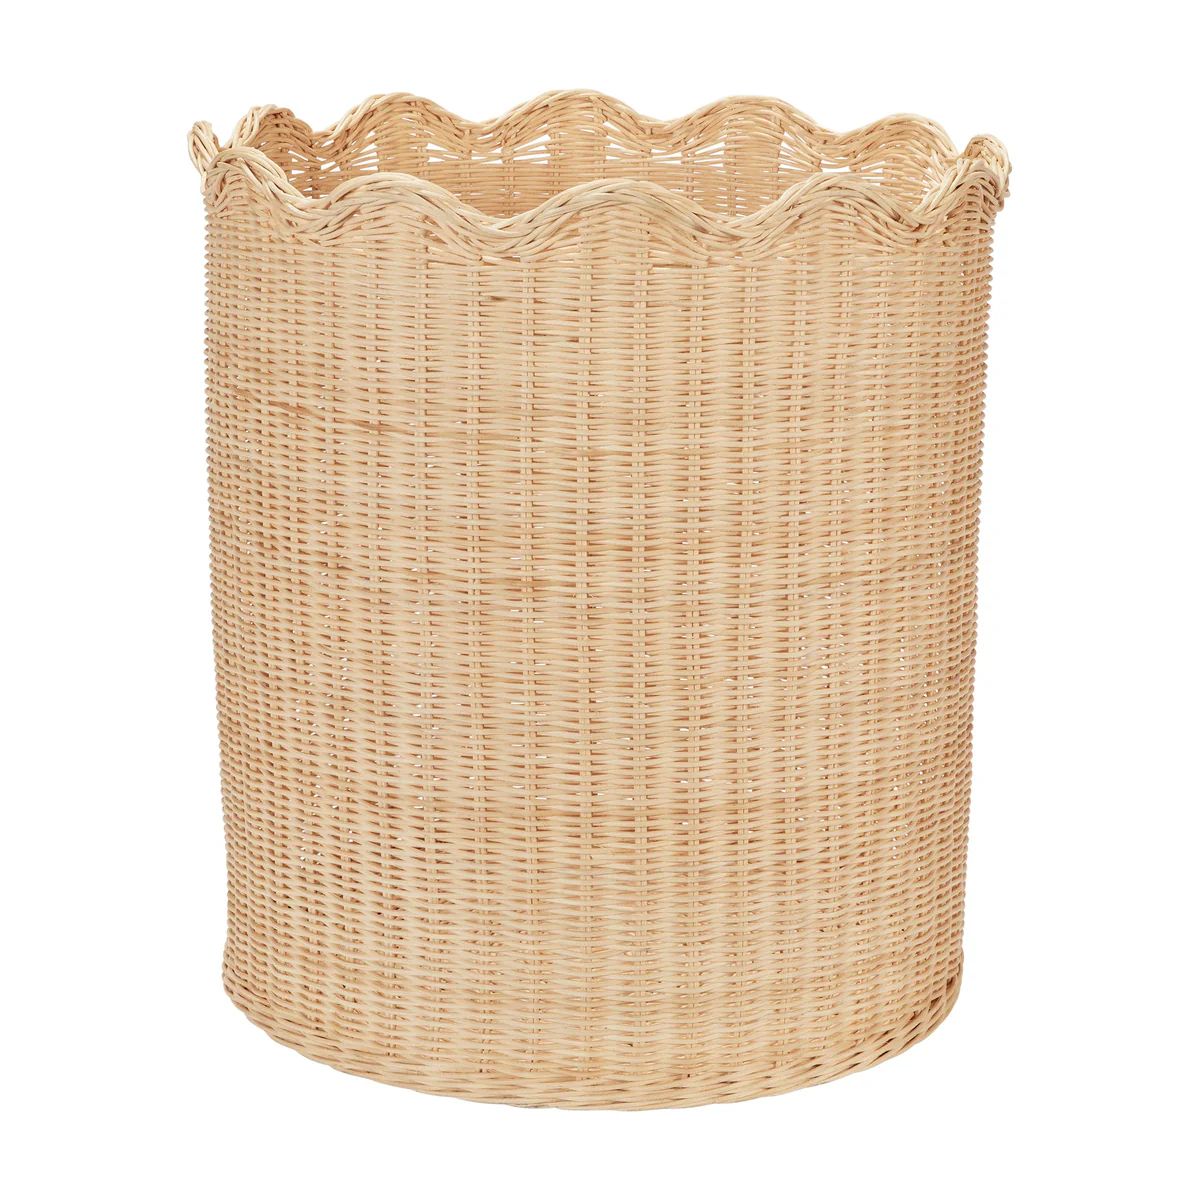 Wavy Wicker Everything Basket XL | Over The Moon Gift